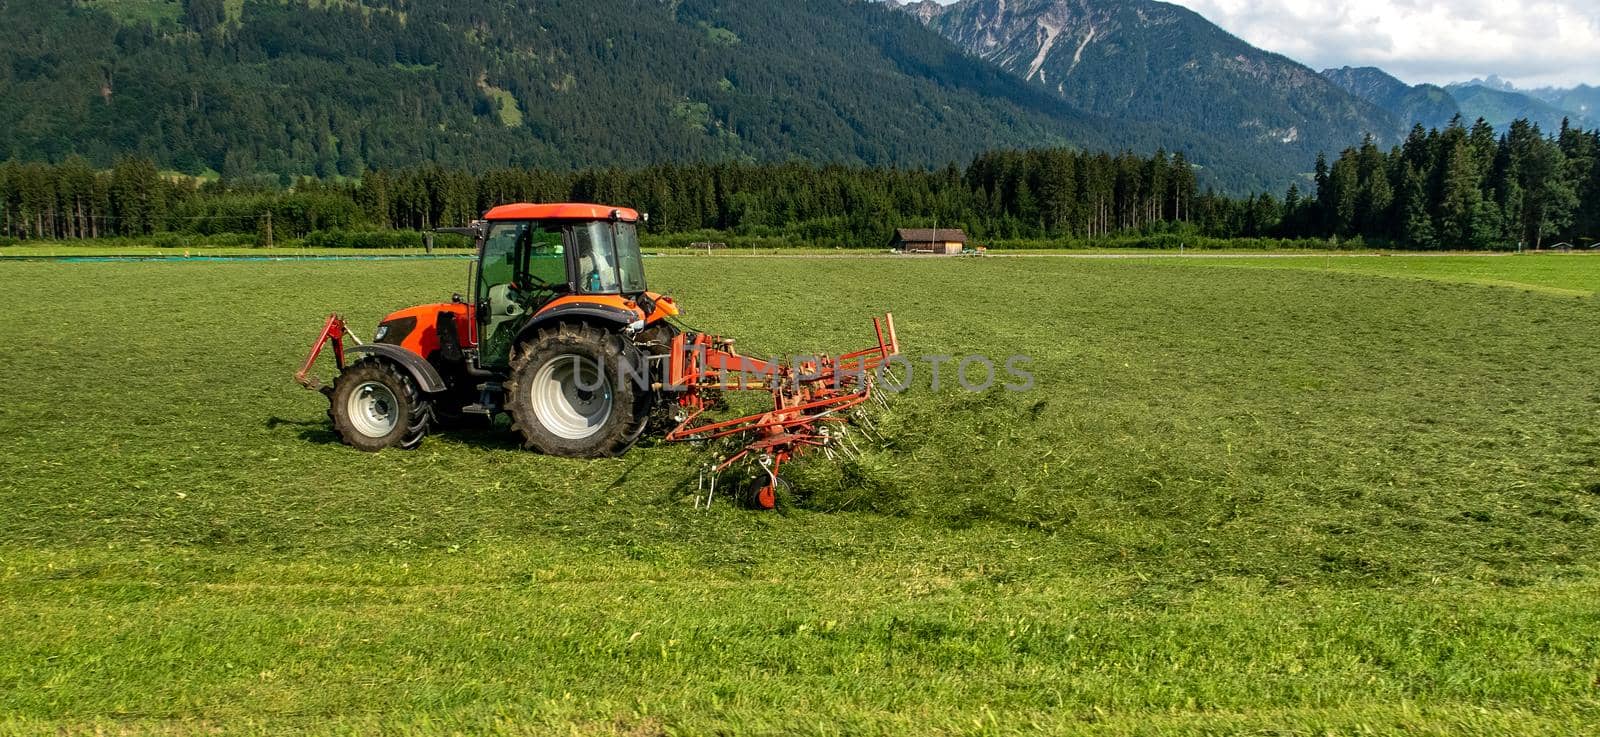 Agricultural machinery, a tractor collecting grass in a field against a blue sky. Season harvesting, grass, agricultural land.